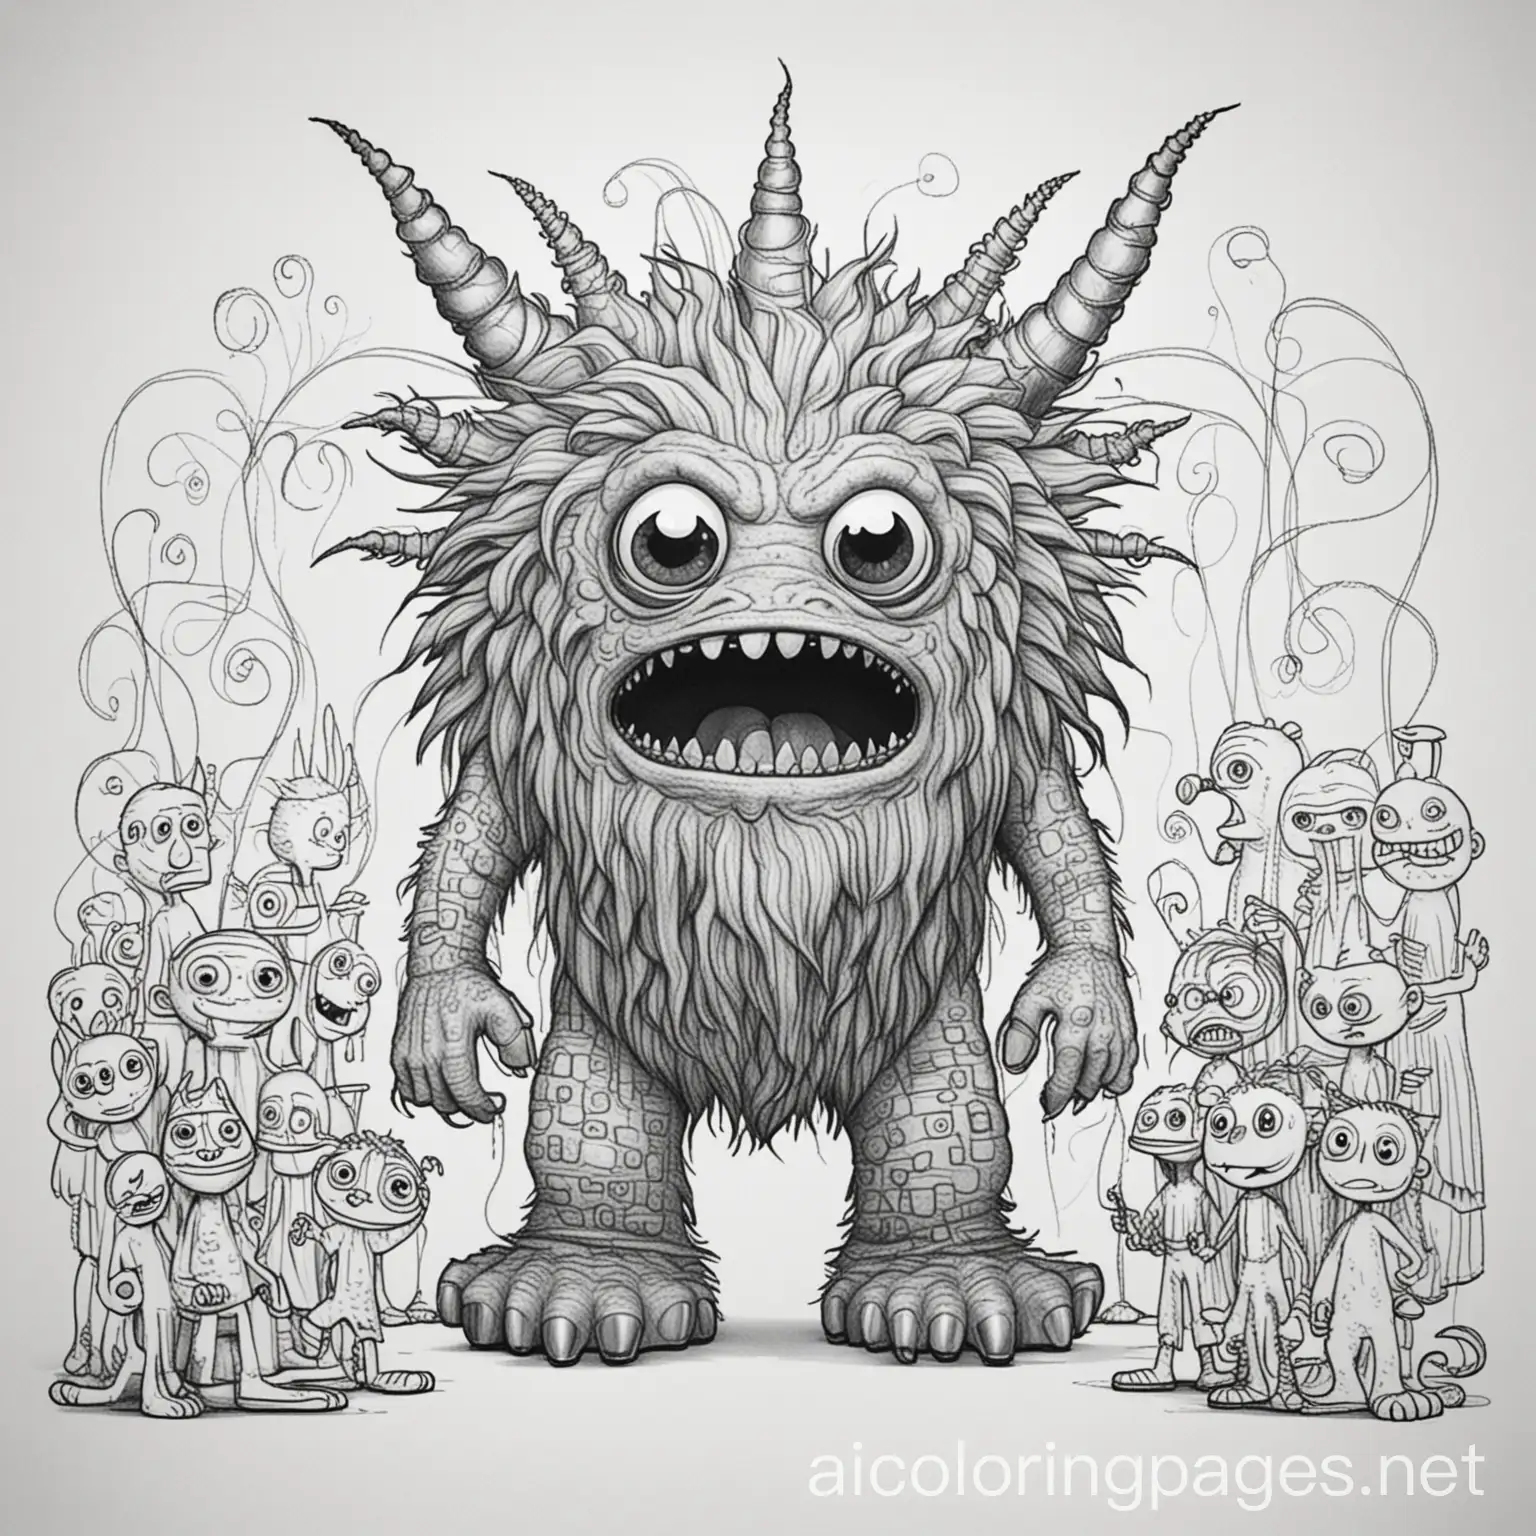 A large monster that looms behind people with tendrils that can attach to them and make them into puppets, Coloring Page, black and white, line art, white background, Simplicity, Ample White Space. The background of the coloring page is plain white to make it easy for young children to color within the lines. The outlines of all the subjects are easy to distinguish, making it simple for kids to color without too much difficulty